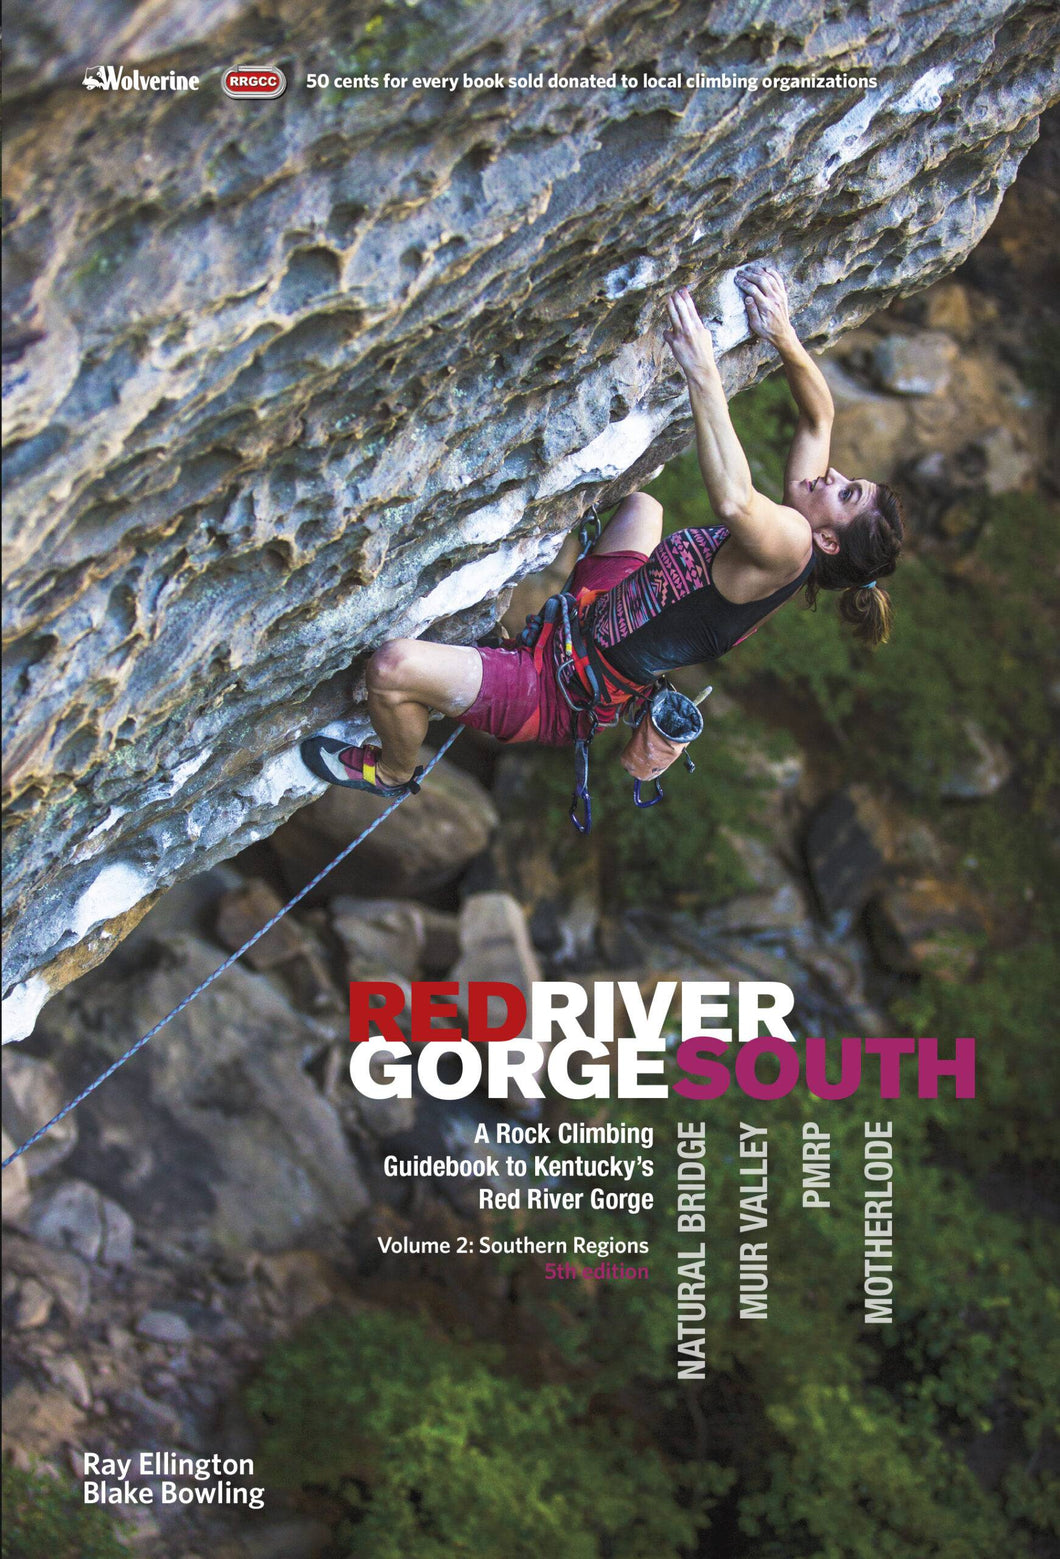 Red River Gorge South - Volume : Southern Regions -  Climbing Guide - Guidebook - Rope Climbing